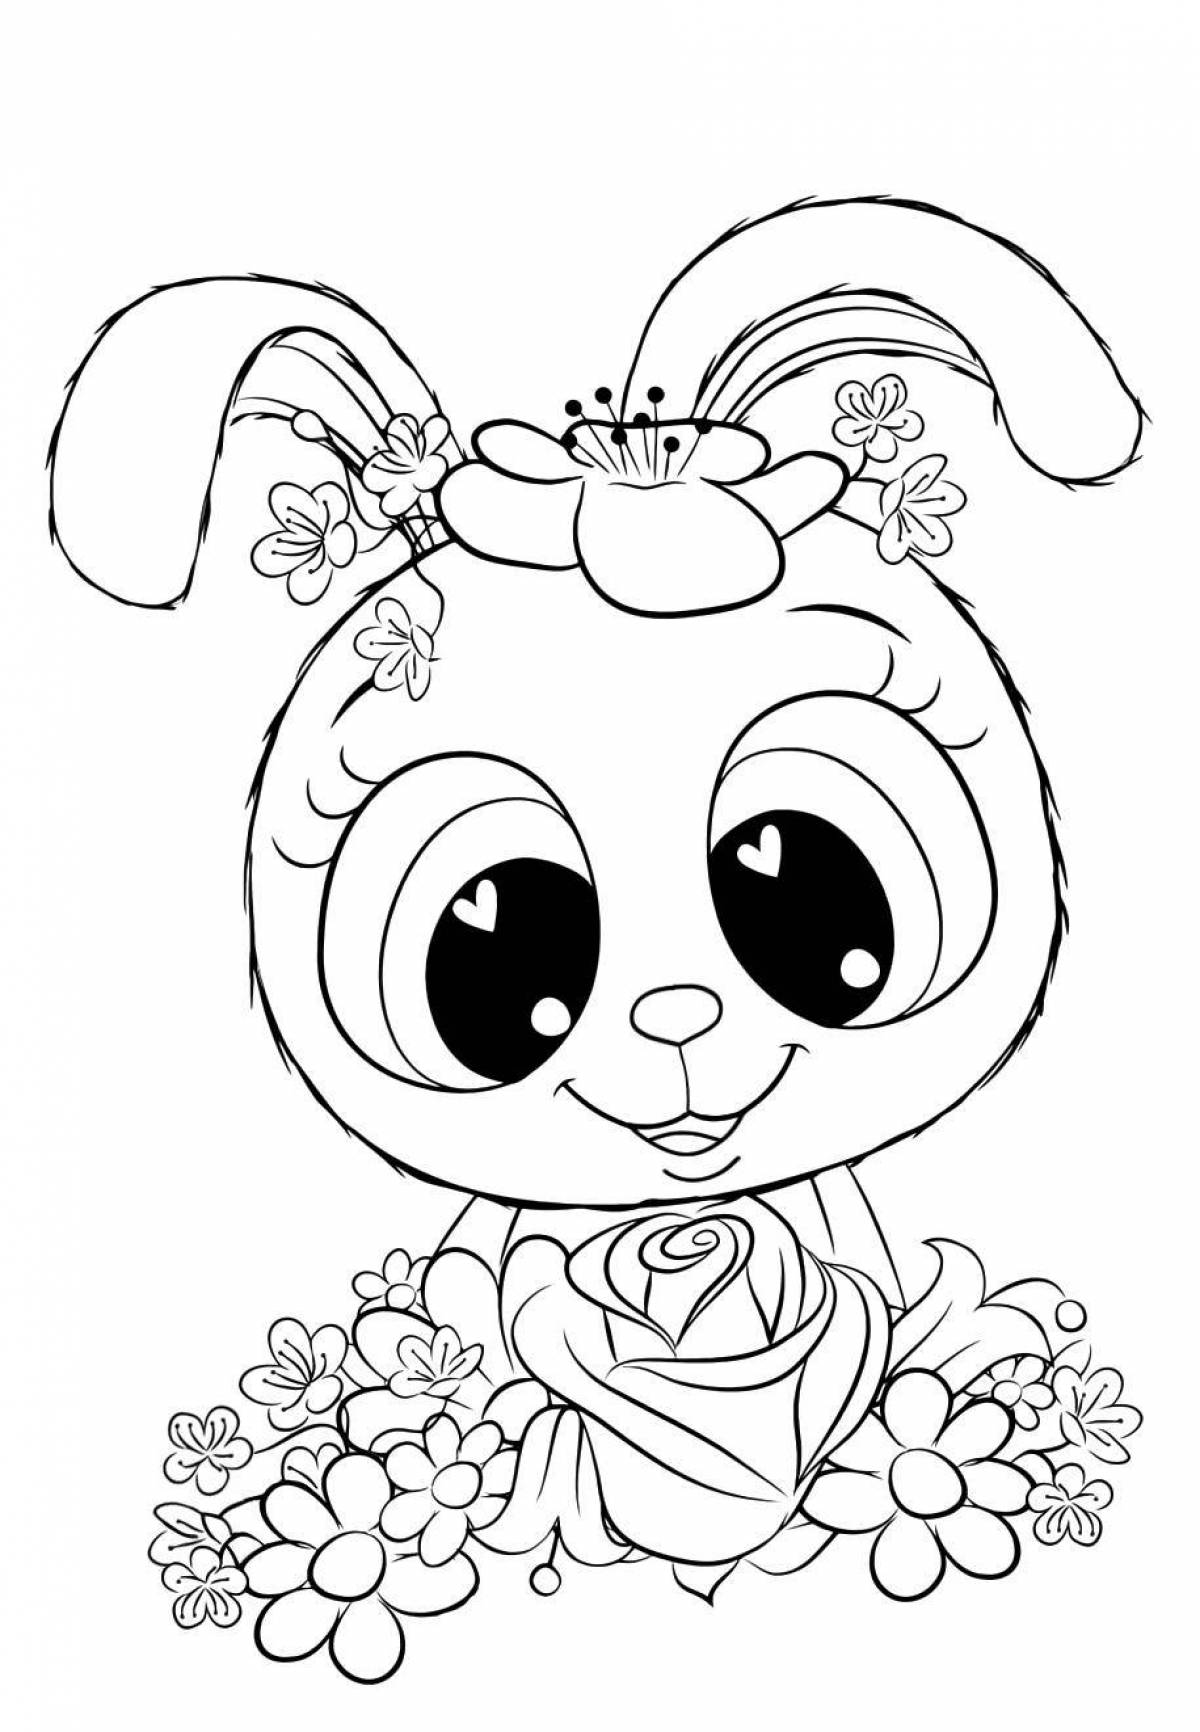 Colorful and cute bunny coloring book